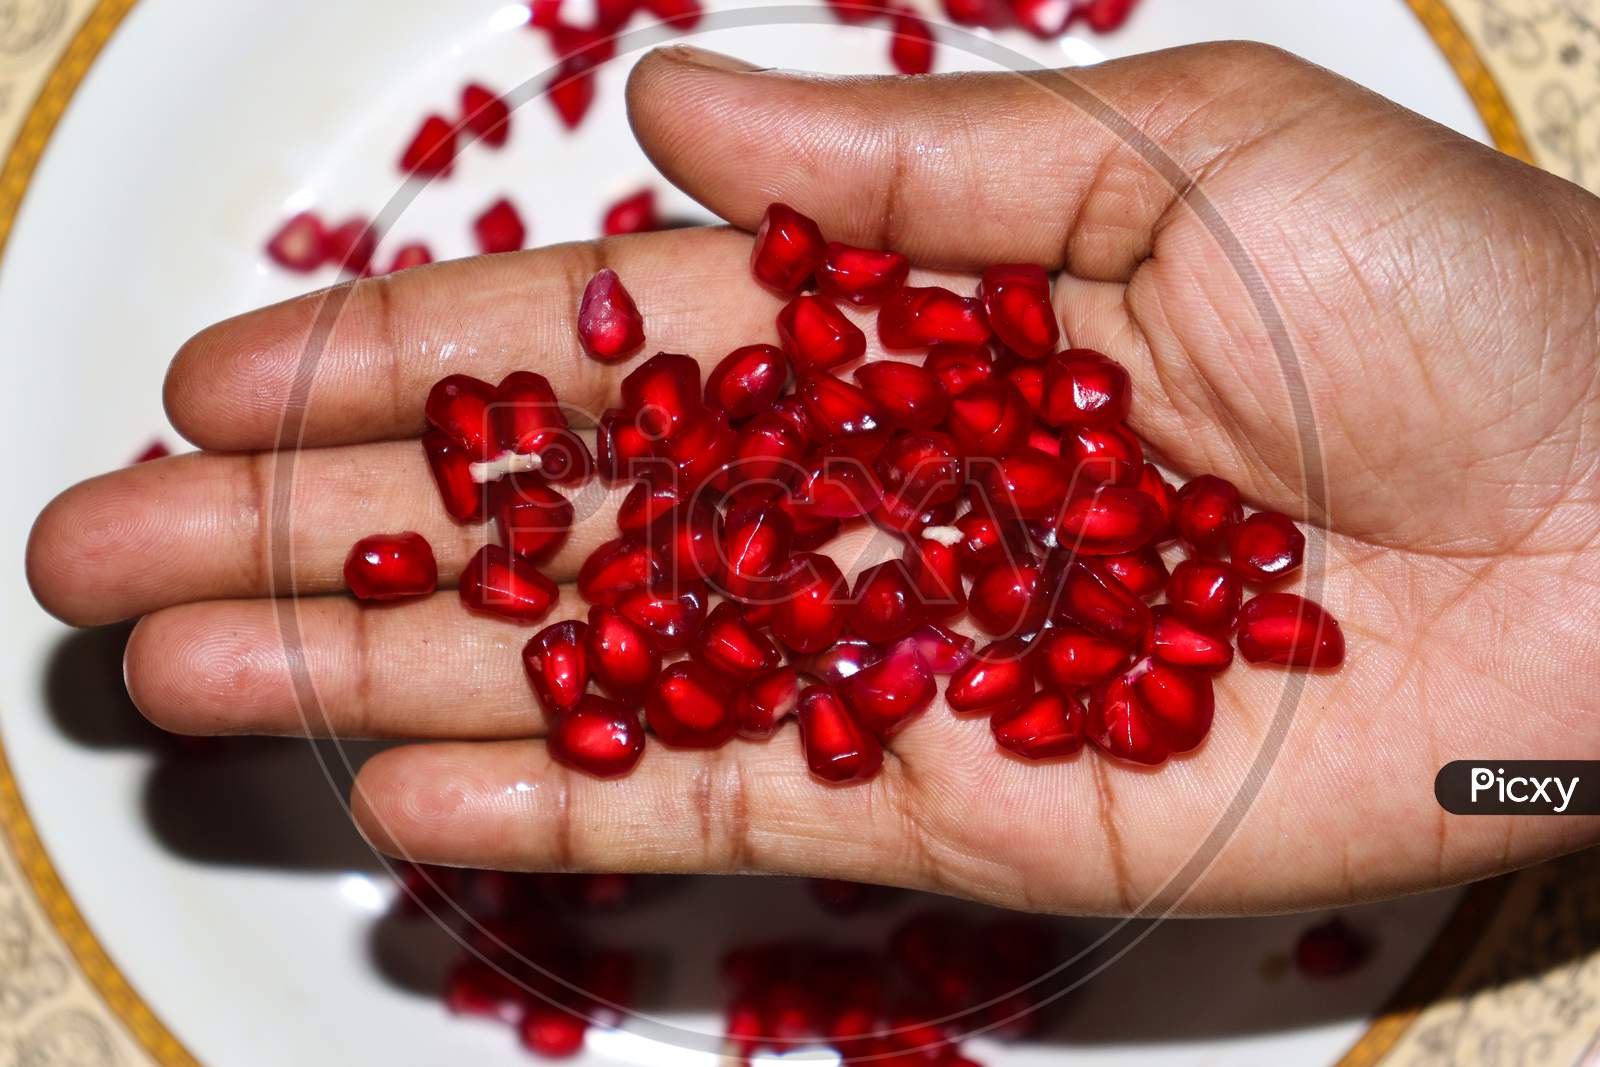 Tasty And Healthy Pomegranate Seeds